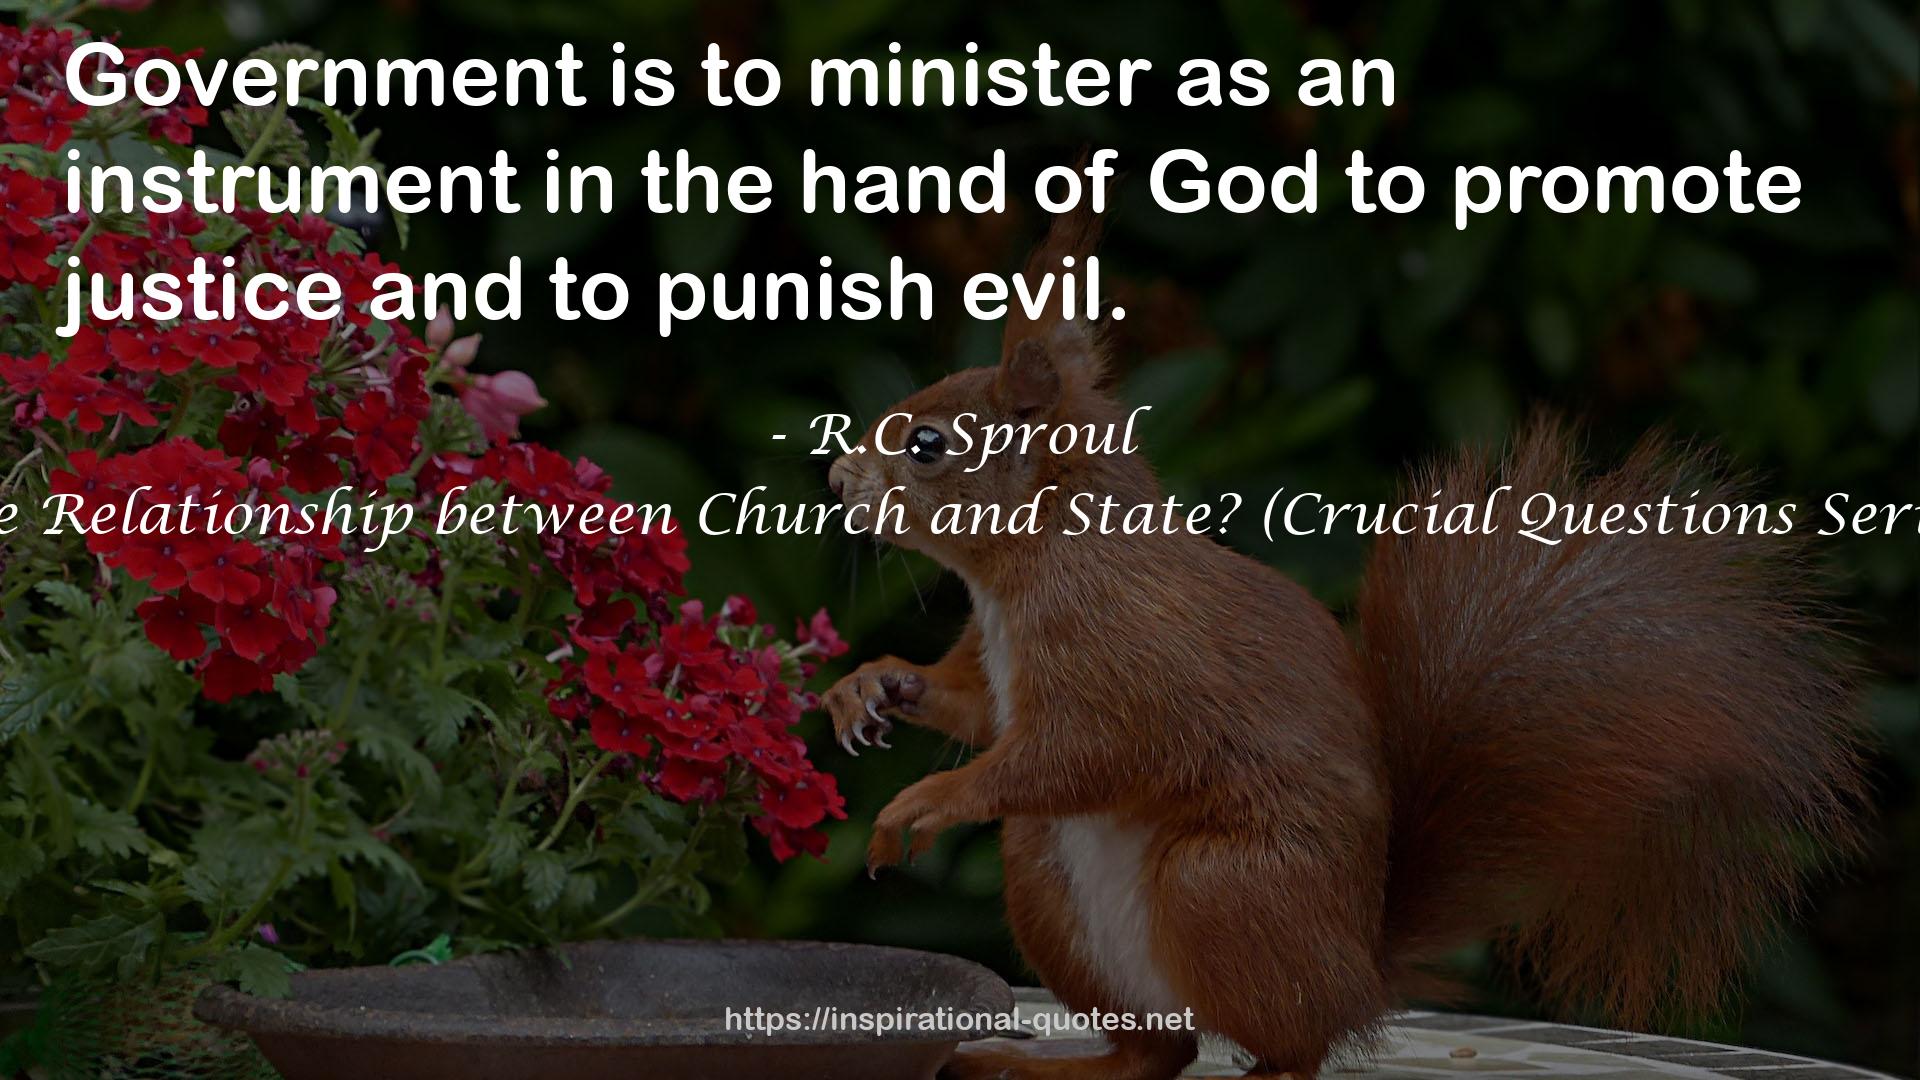 What Is the Relationship between Church and State? (Crucial Questions Series Book 19) QUOTES